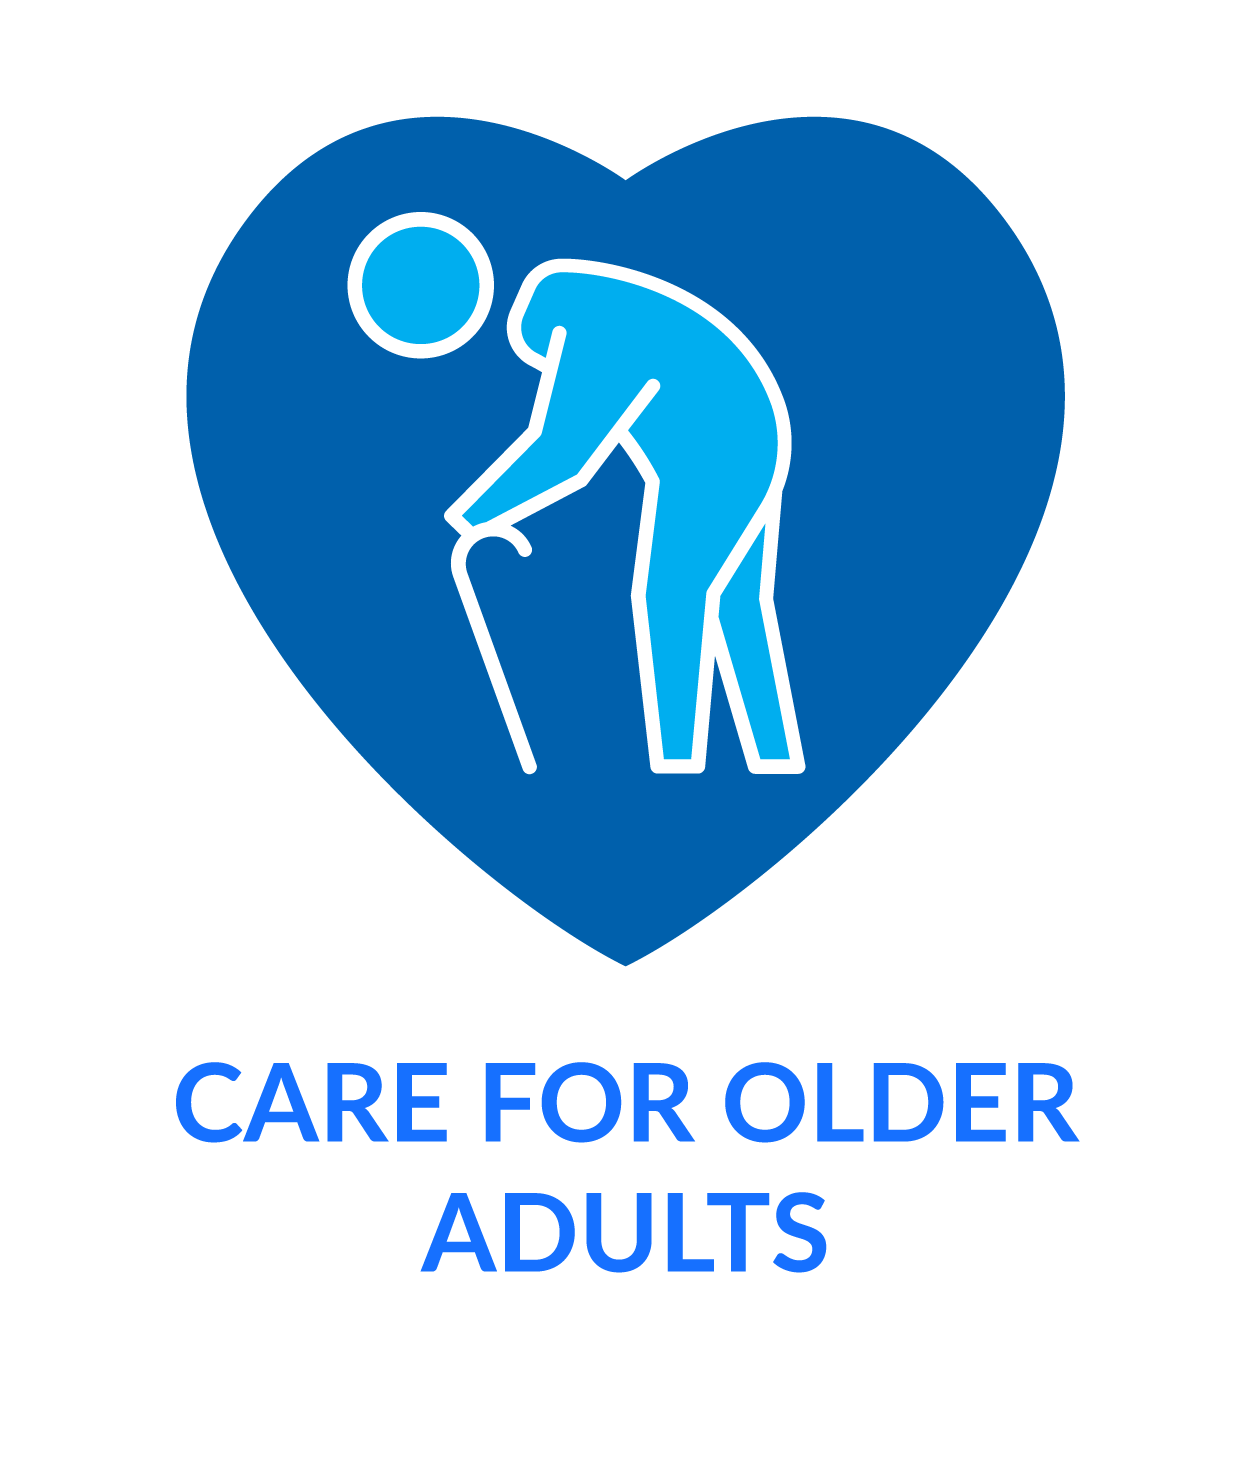 Care for older adults